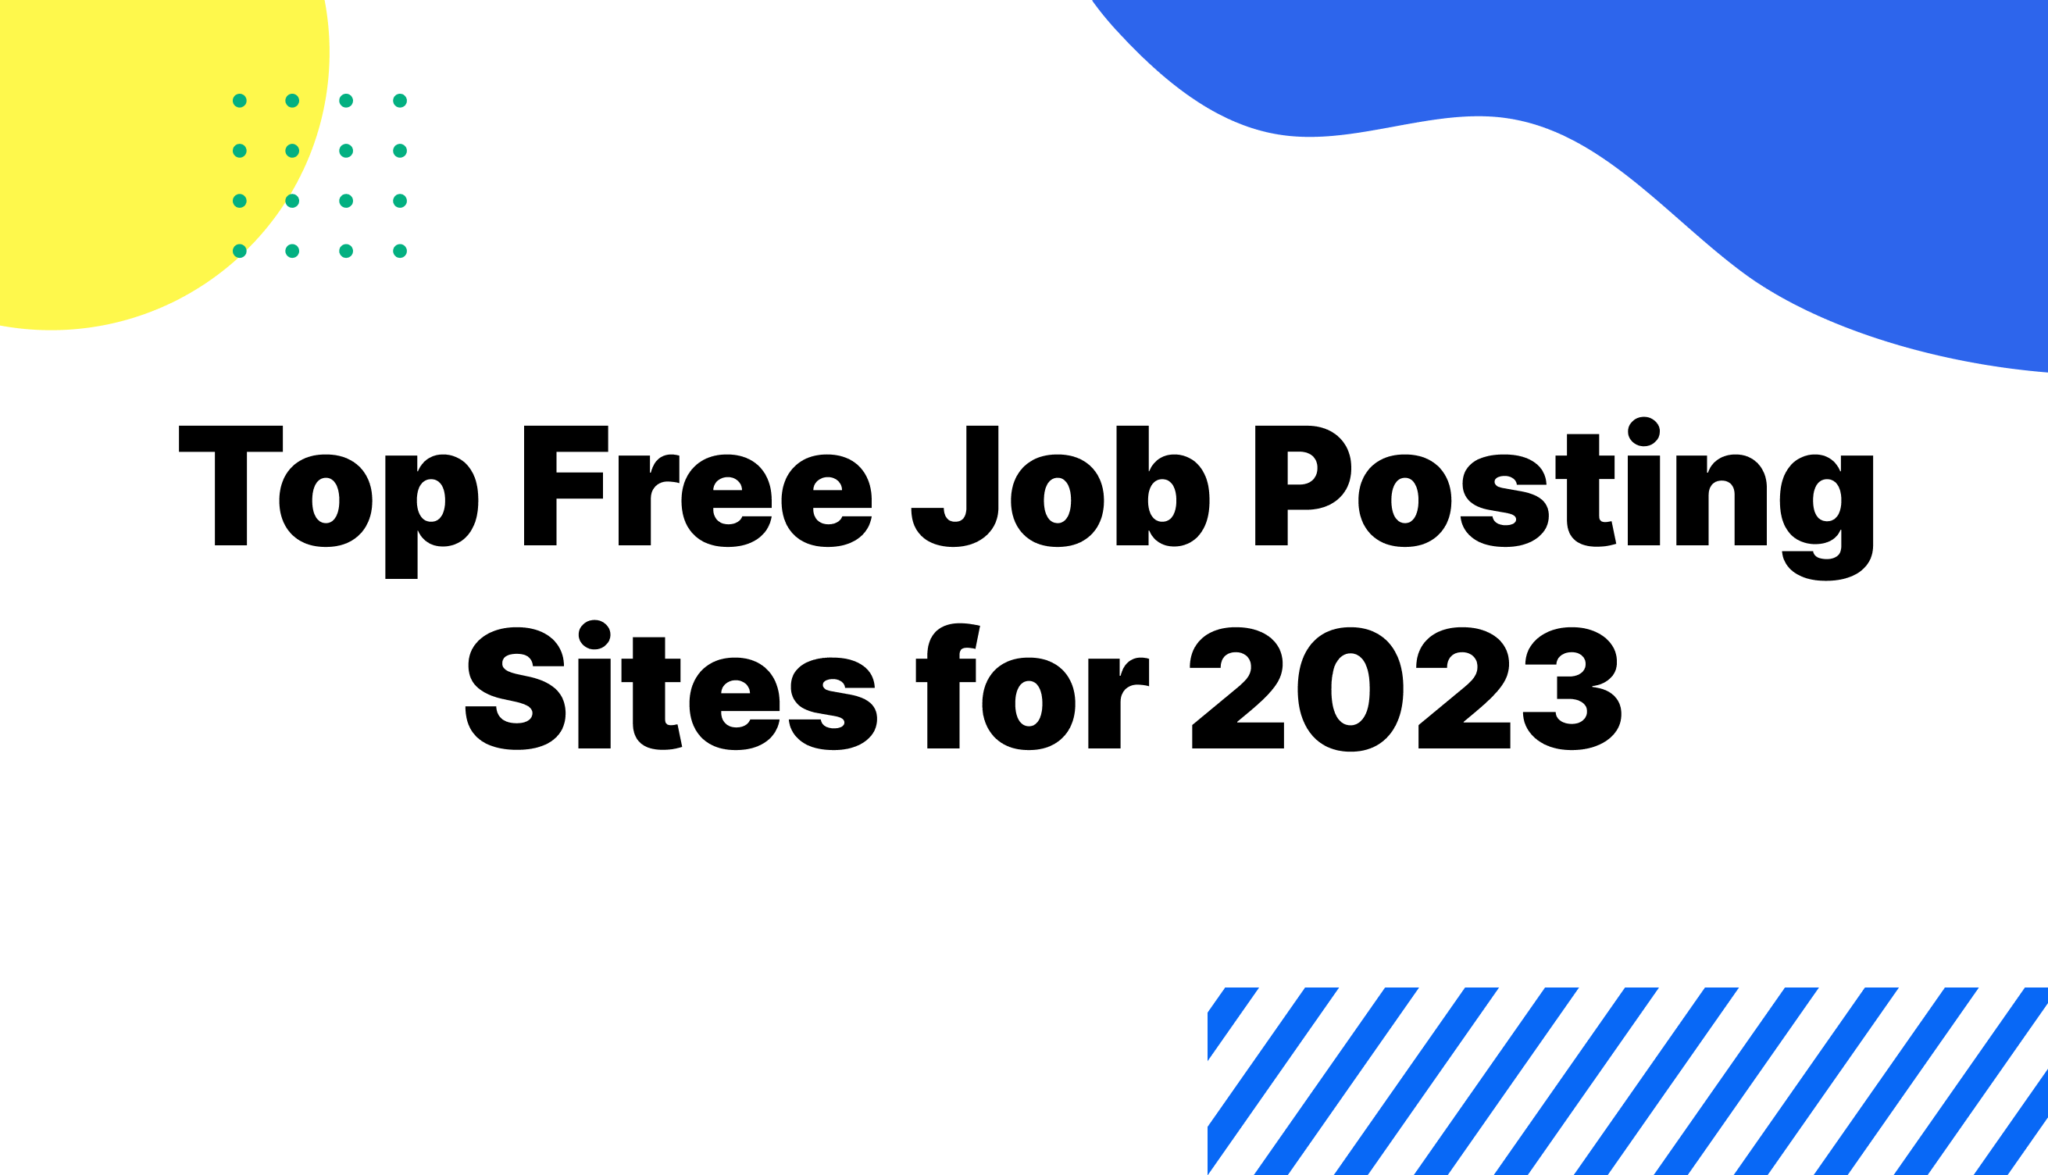 where can I post jobs for free in the USA